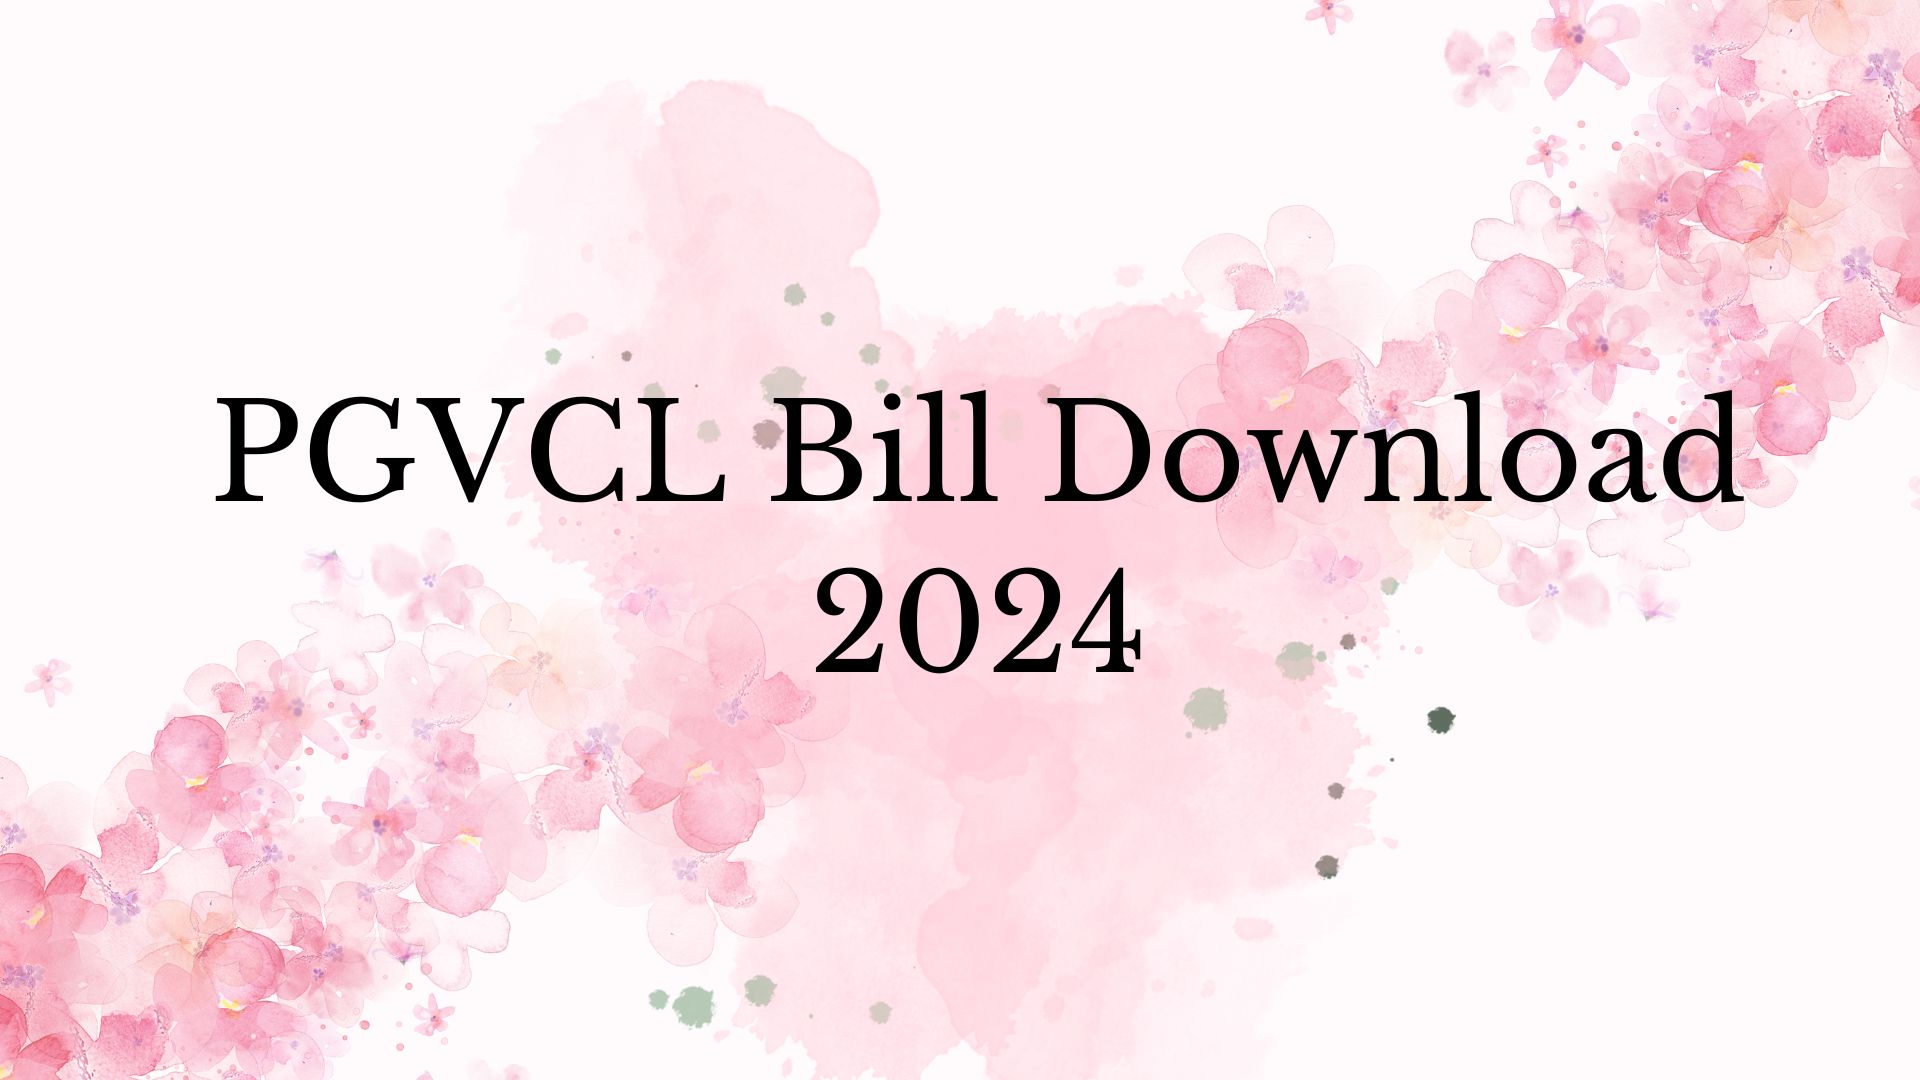 PGVCL Bill Download 2024